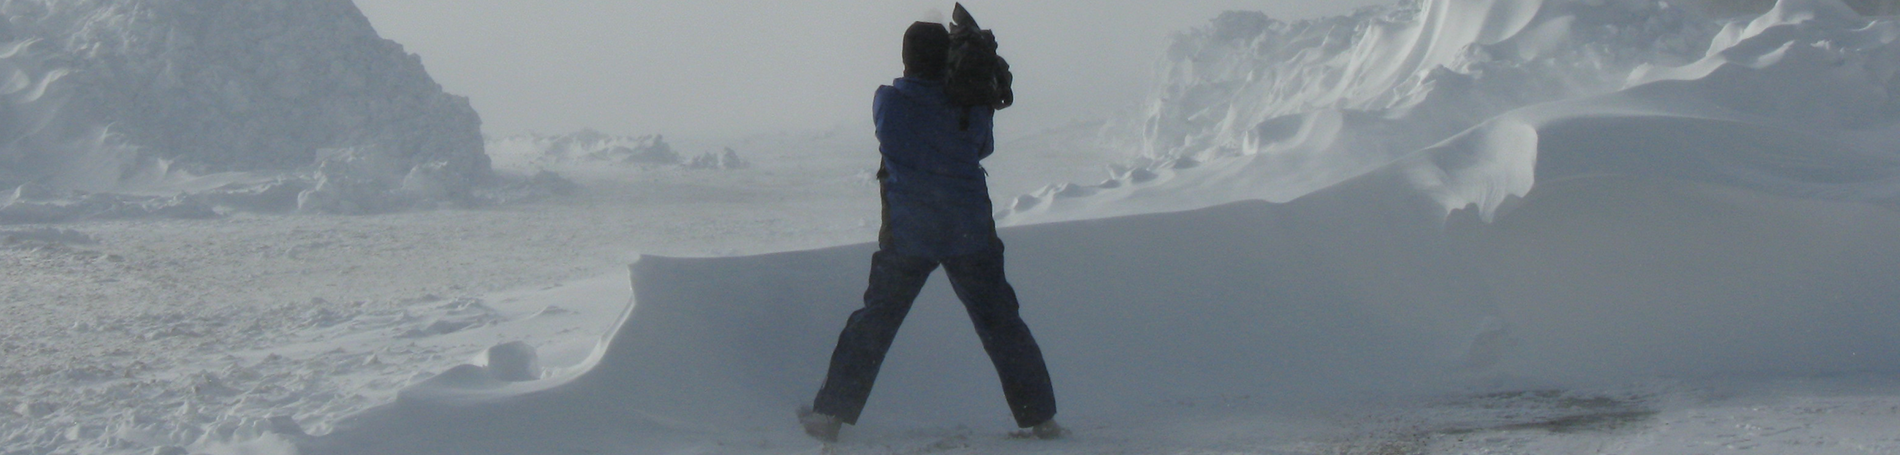 Cameraman standing in the snow.